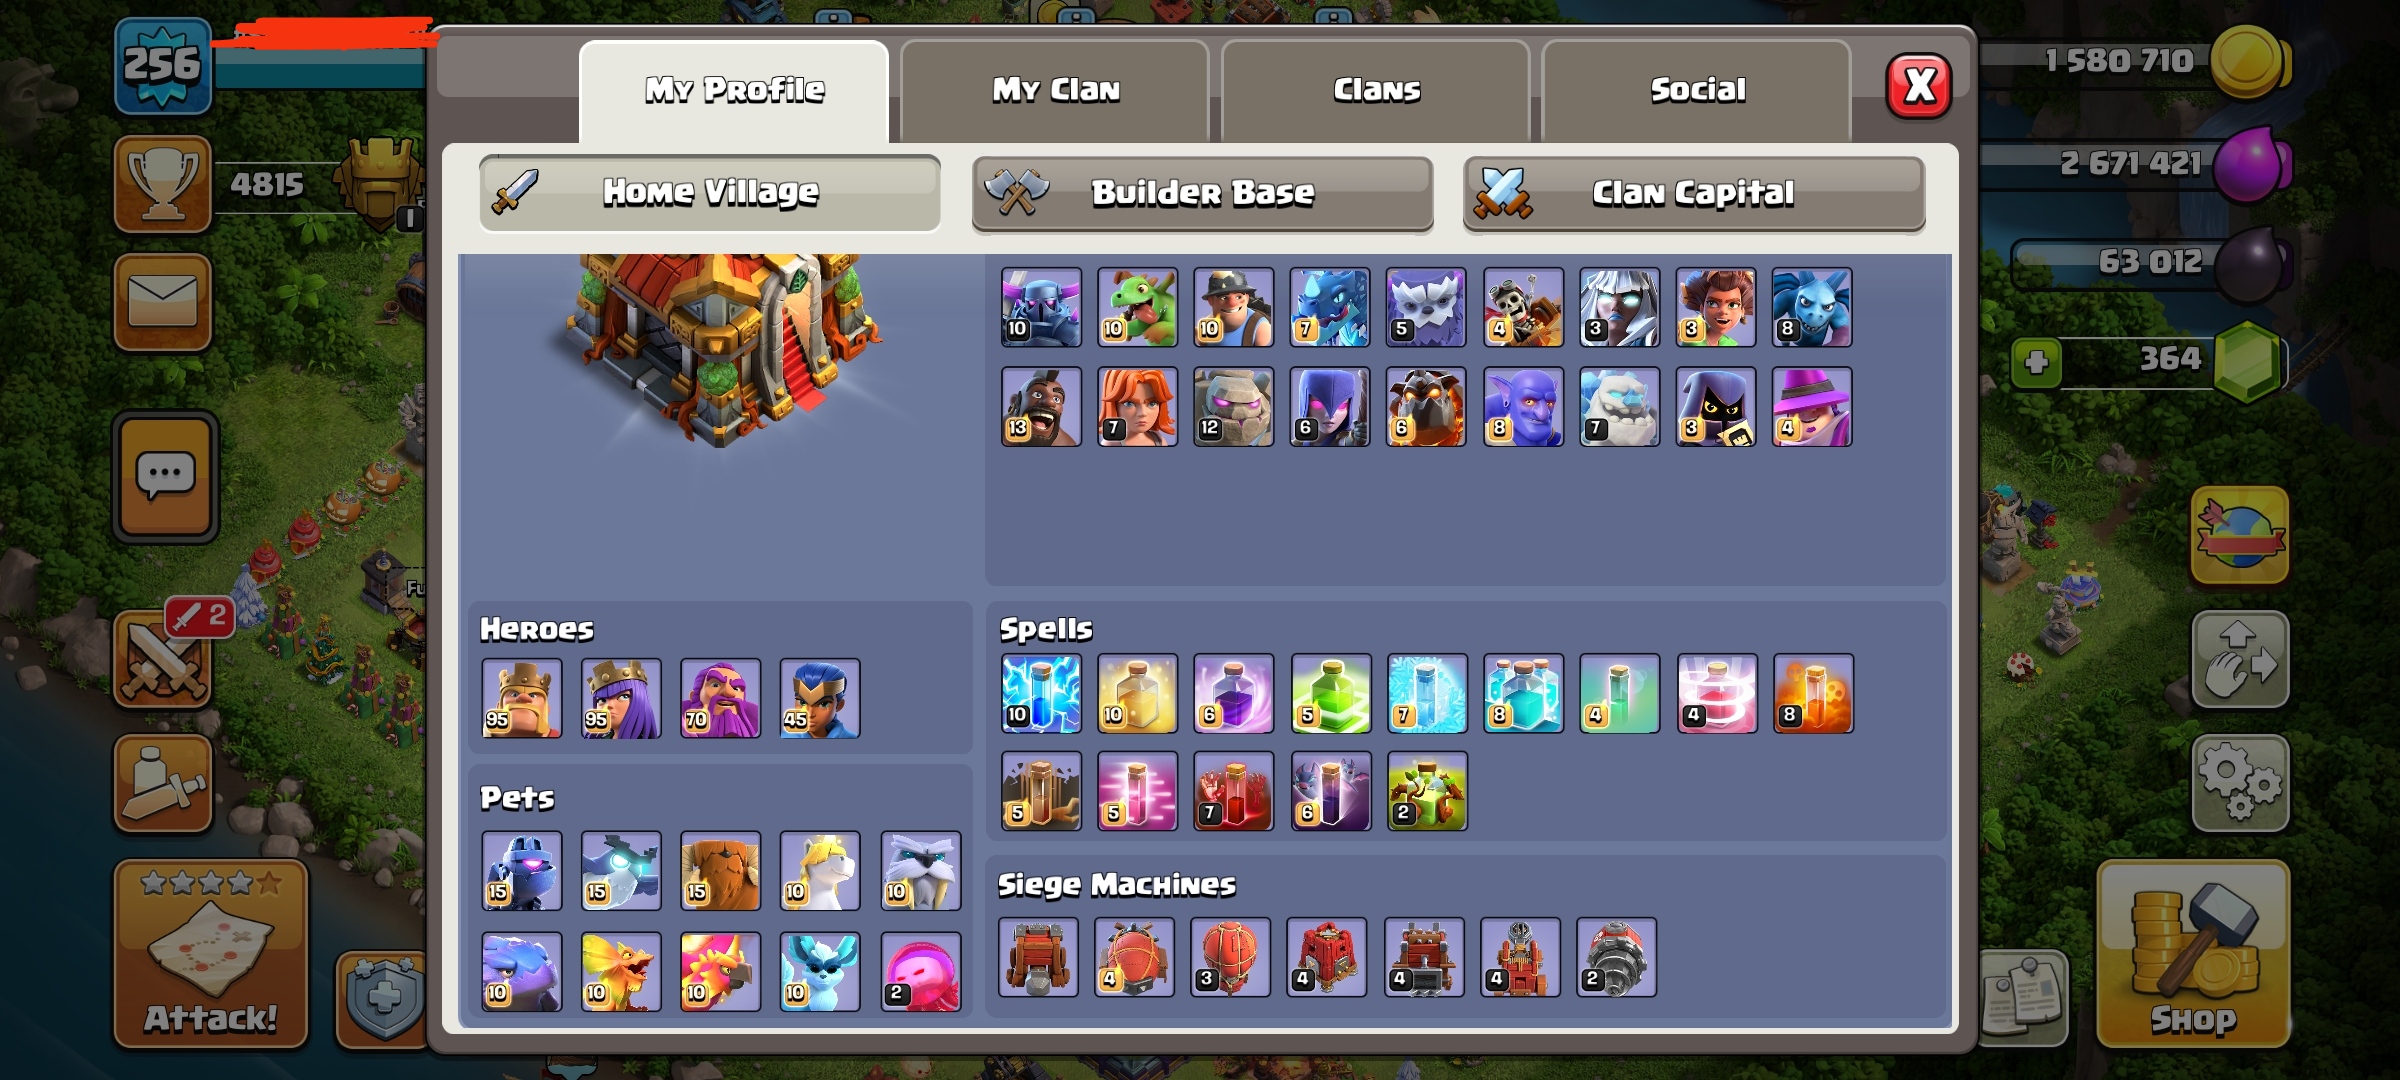 98% Max Th16, Xp 256, All Heroes Max, Name Change Free, 2990 WAR STAR, PB 6104, LT 13396, GIANT GAUNTLET